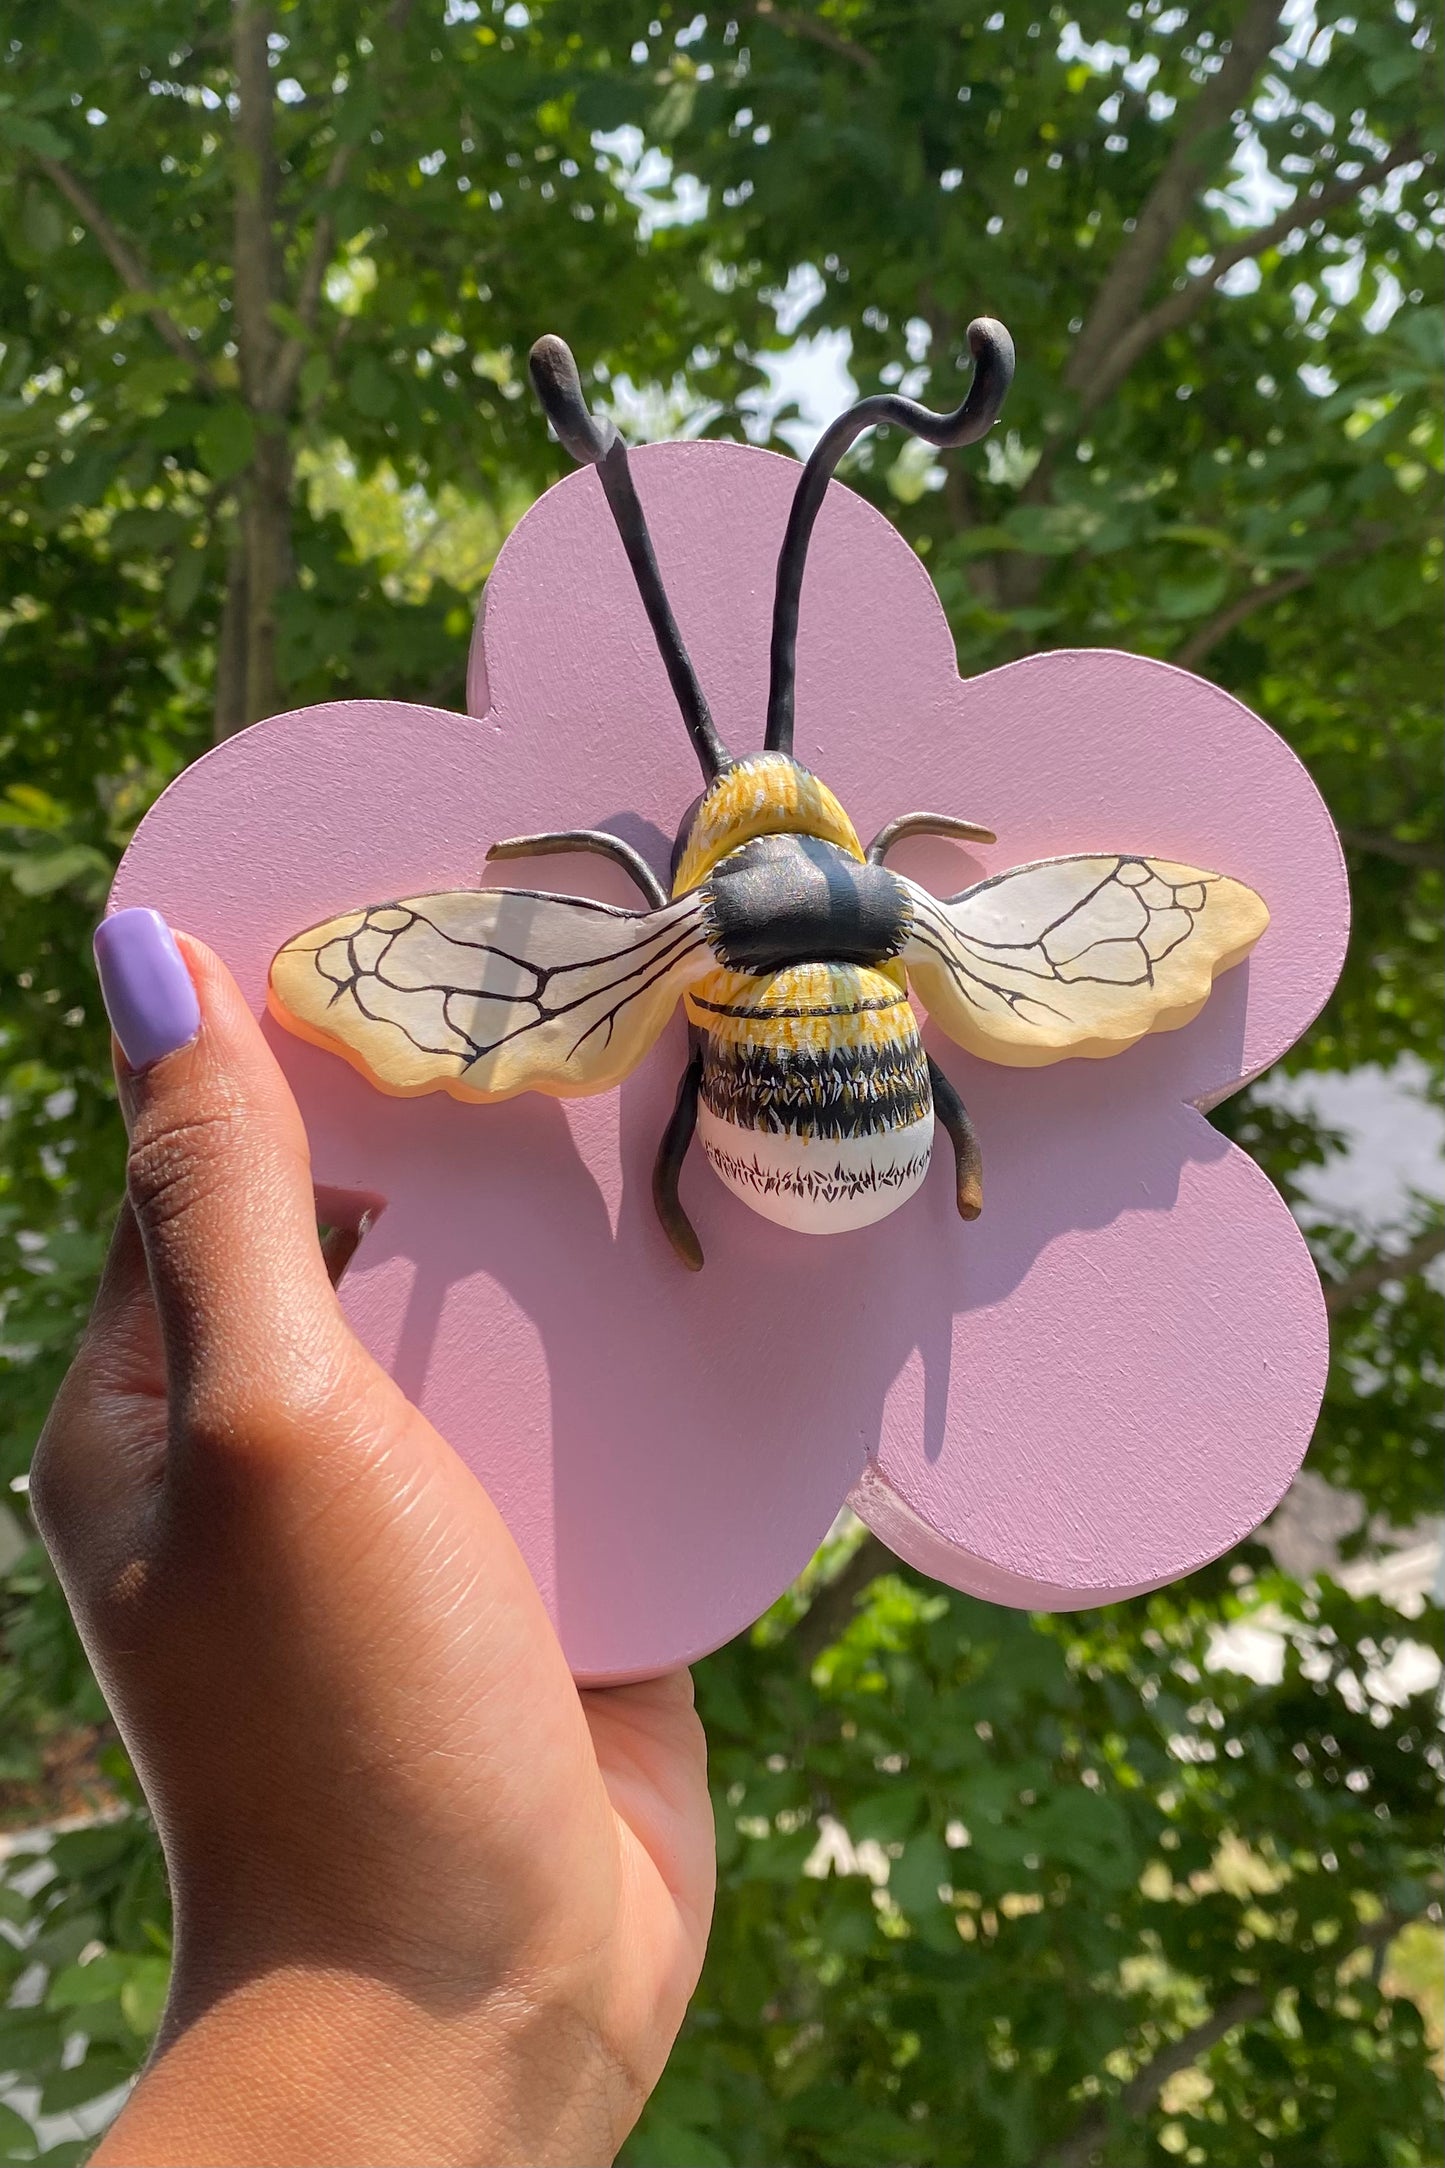 Flower shaped key rack with bumblebee decor. The antennas of the bumblebee holds the keys.